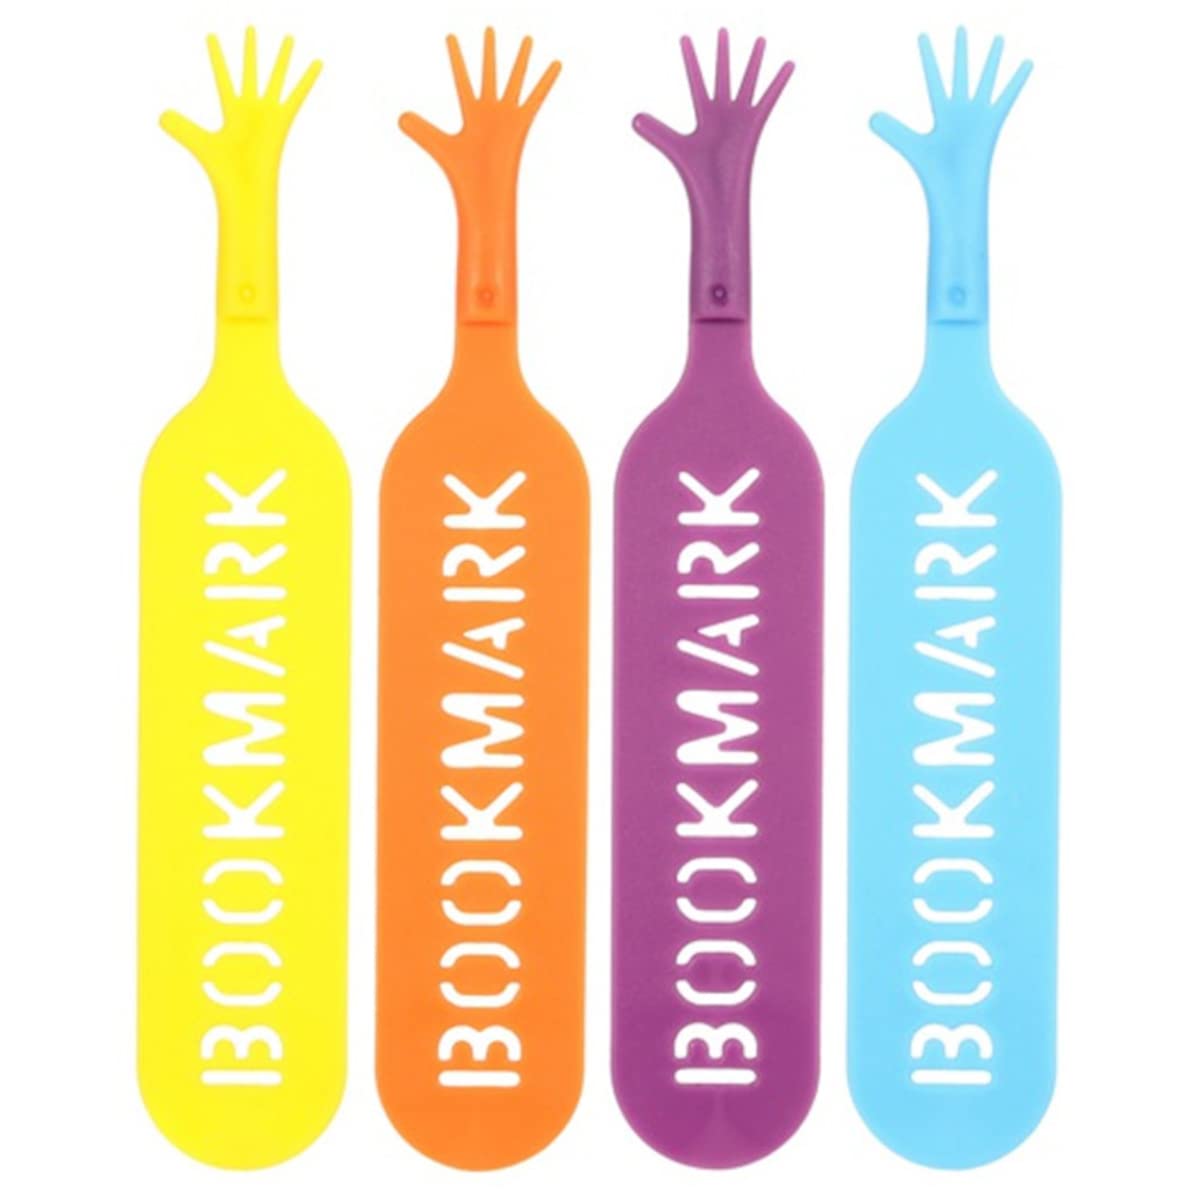 ECVV 4 Pcs Cute Help Me Bookmarks for Adults/Kids, Funny Finger Point Novelty Page Holder for Students/Readers, Reading Book Markers 4 Colors School Supplies